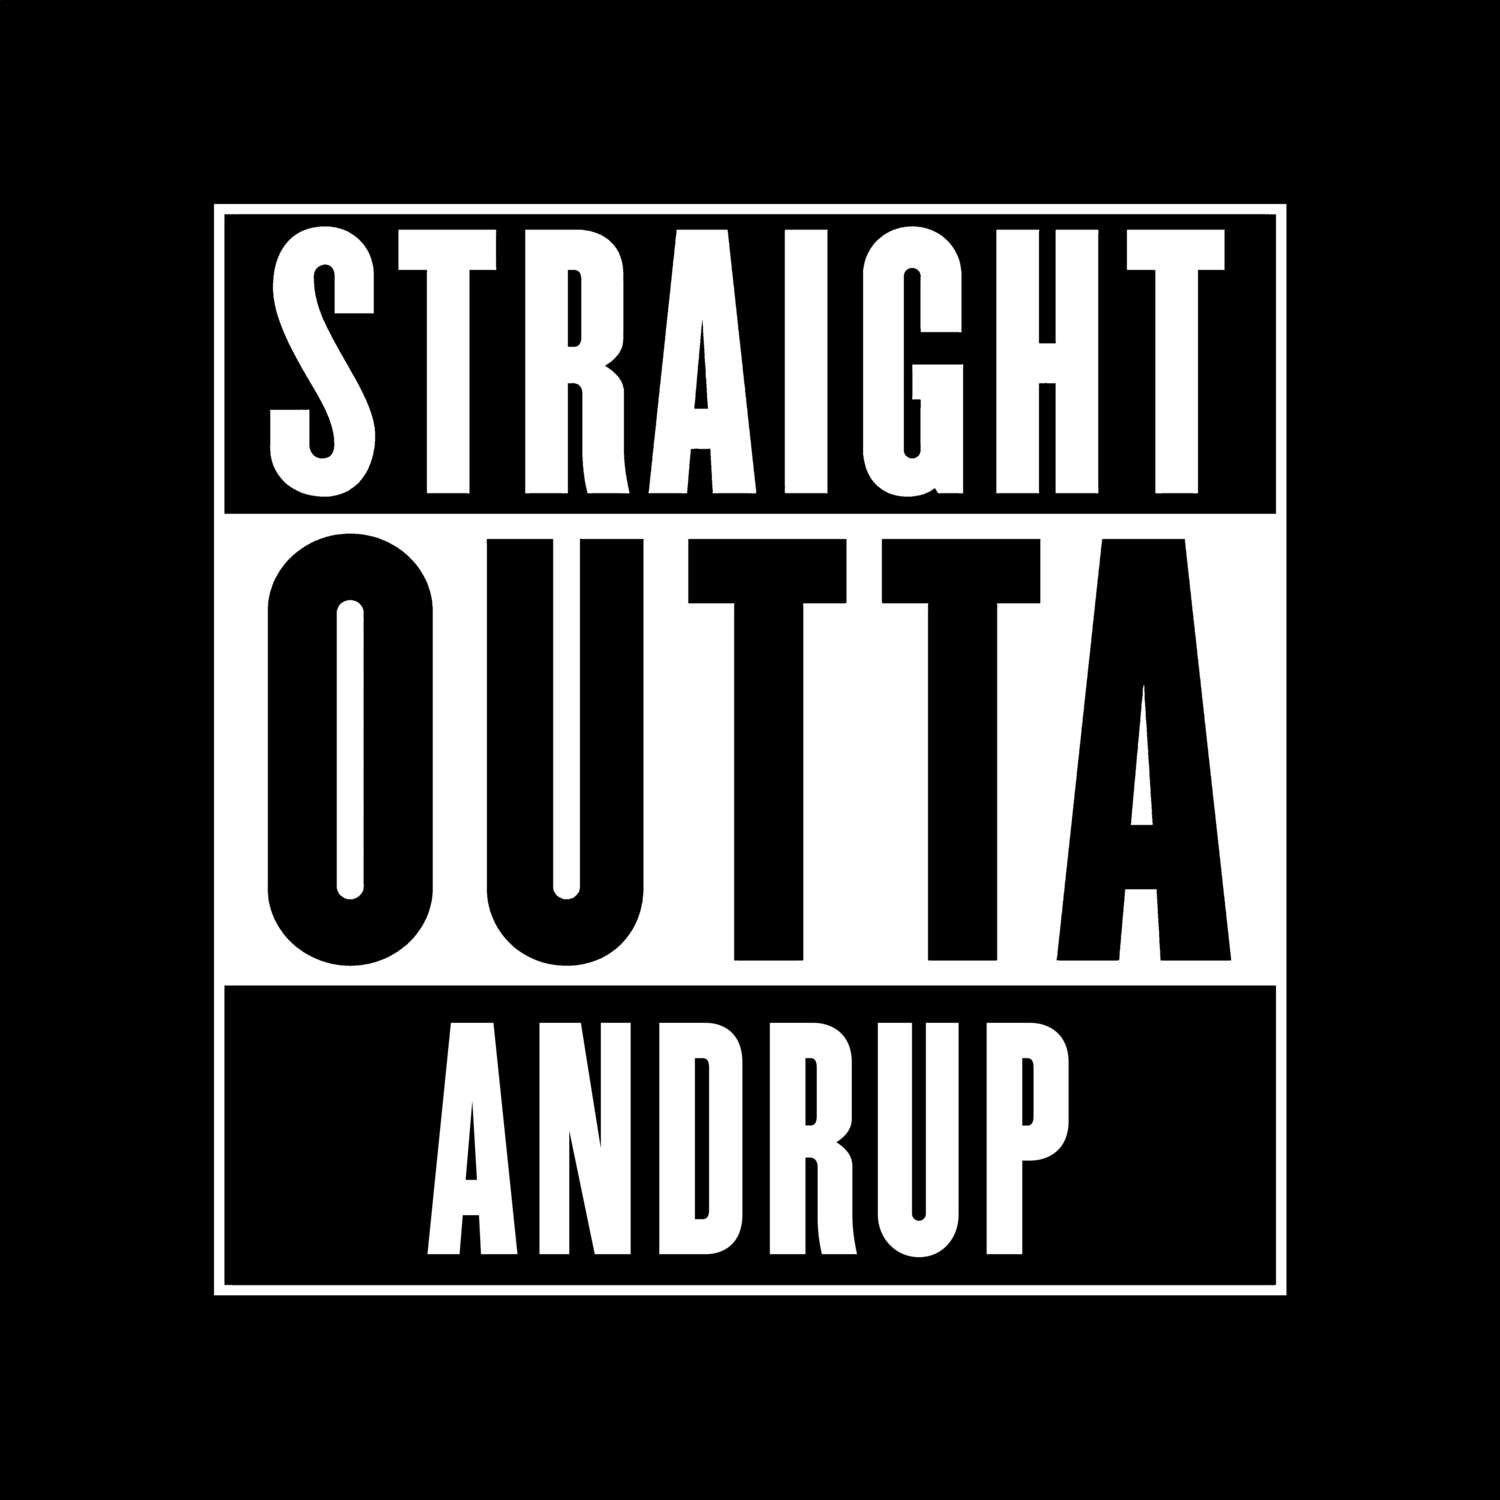 Andrup T-Shirt »Straight Outta«